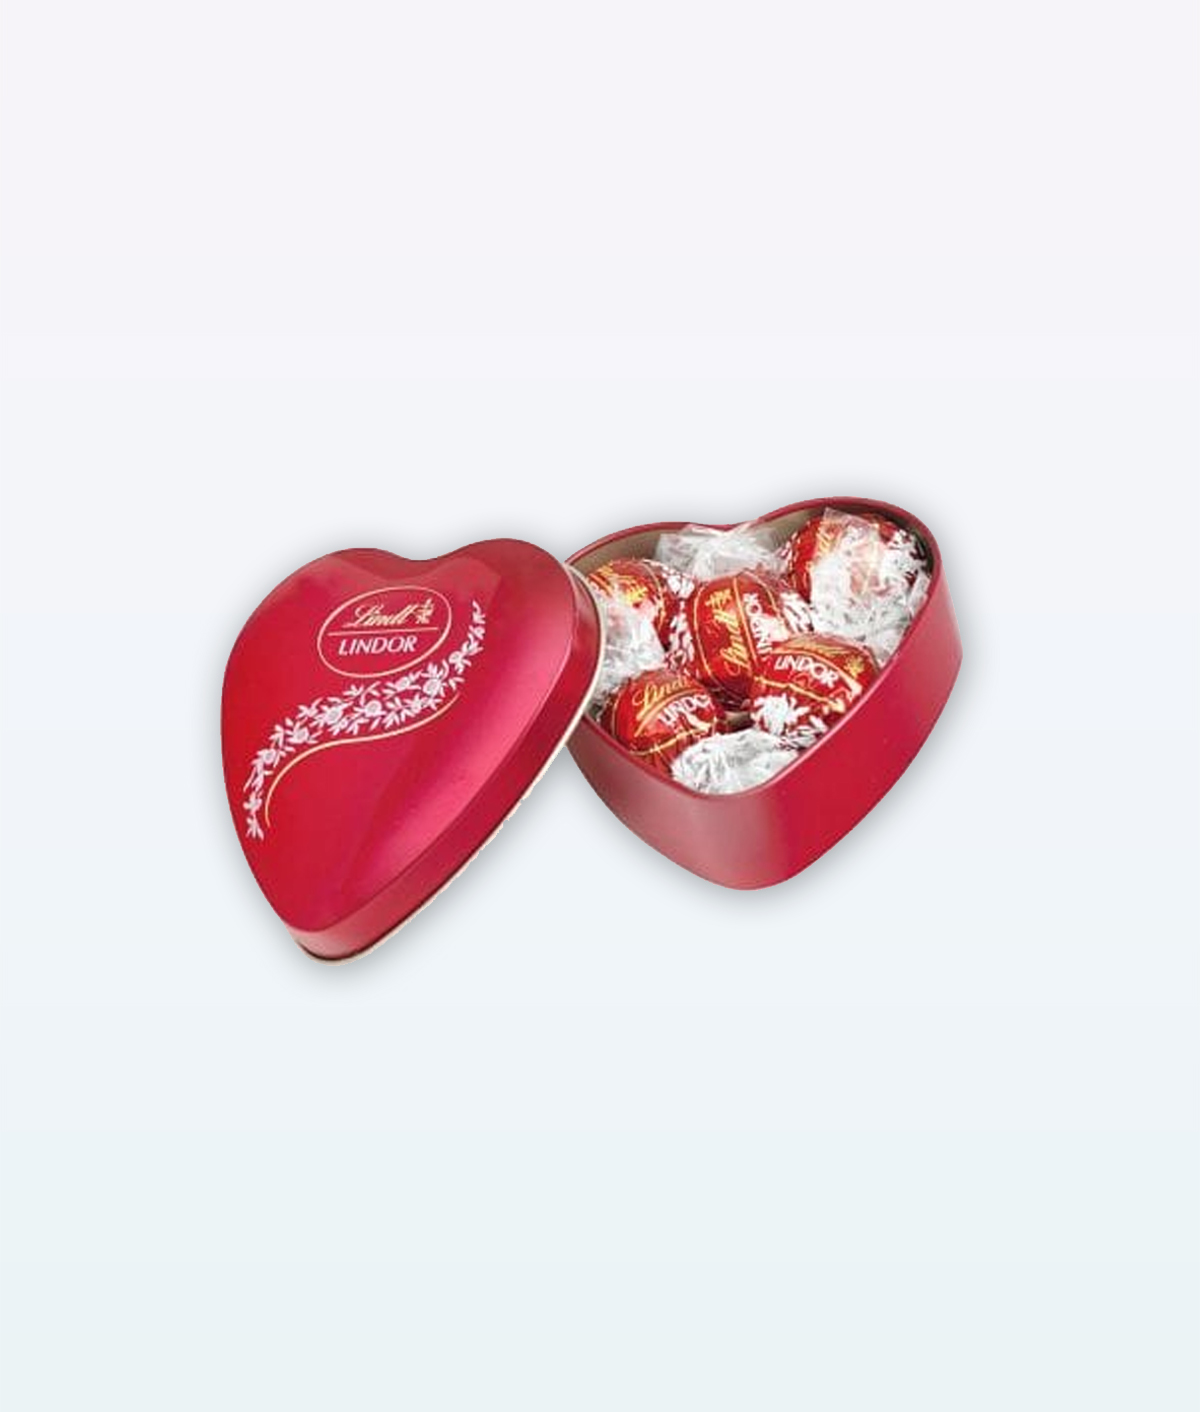 Lindt Lindor Chocolate Heart Box 62g open